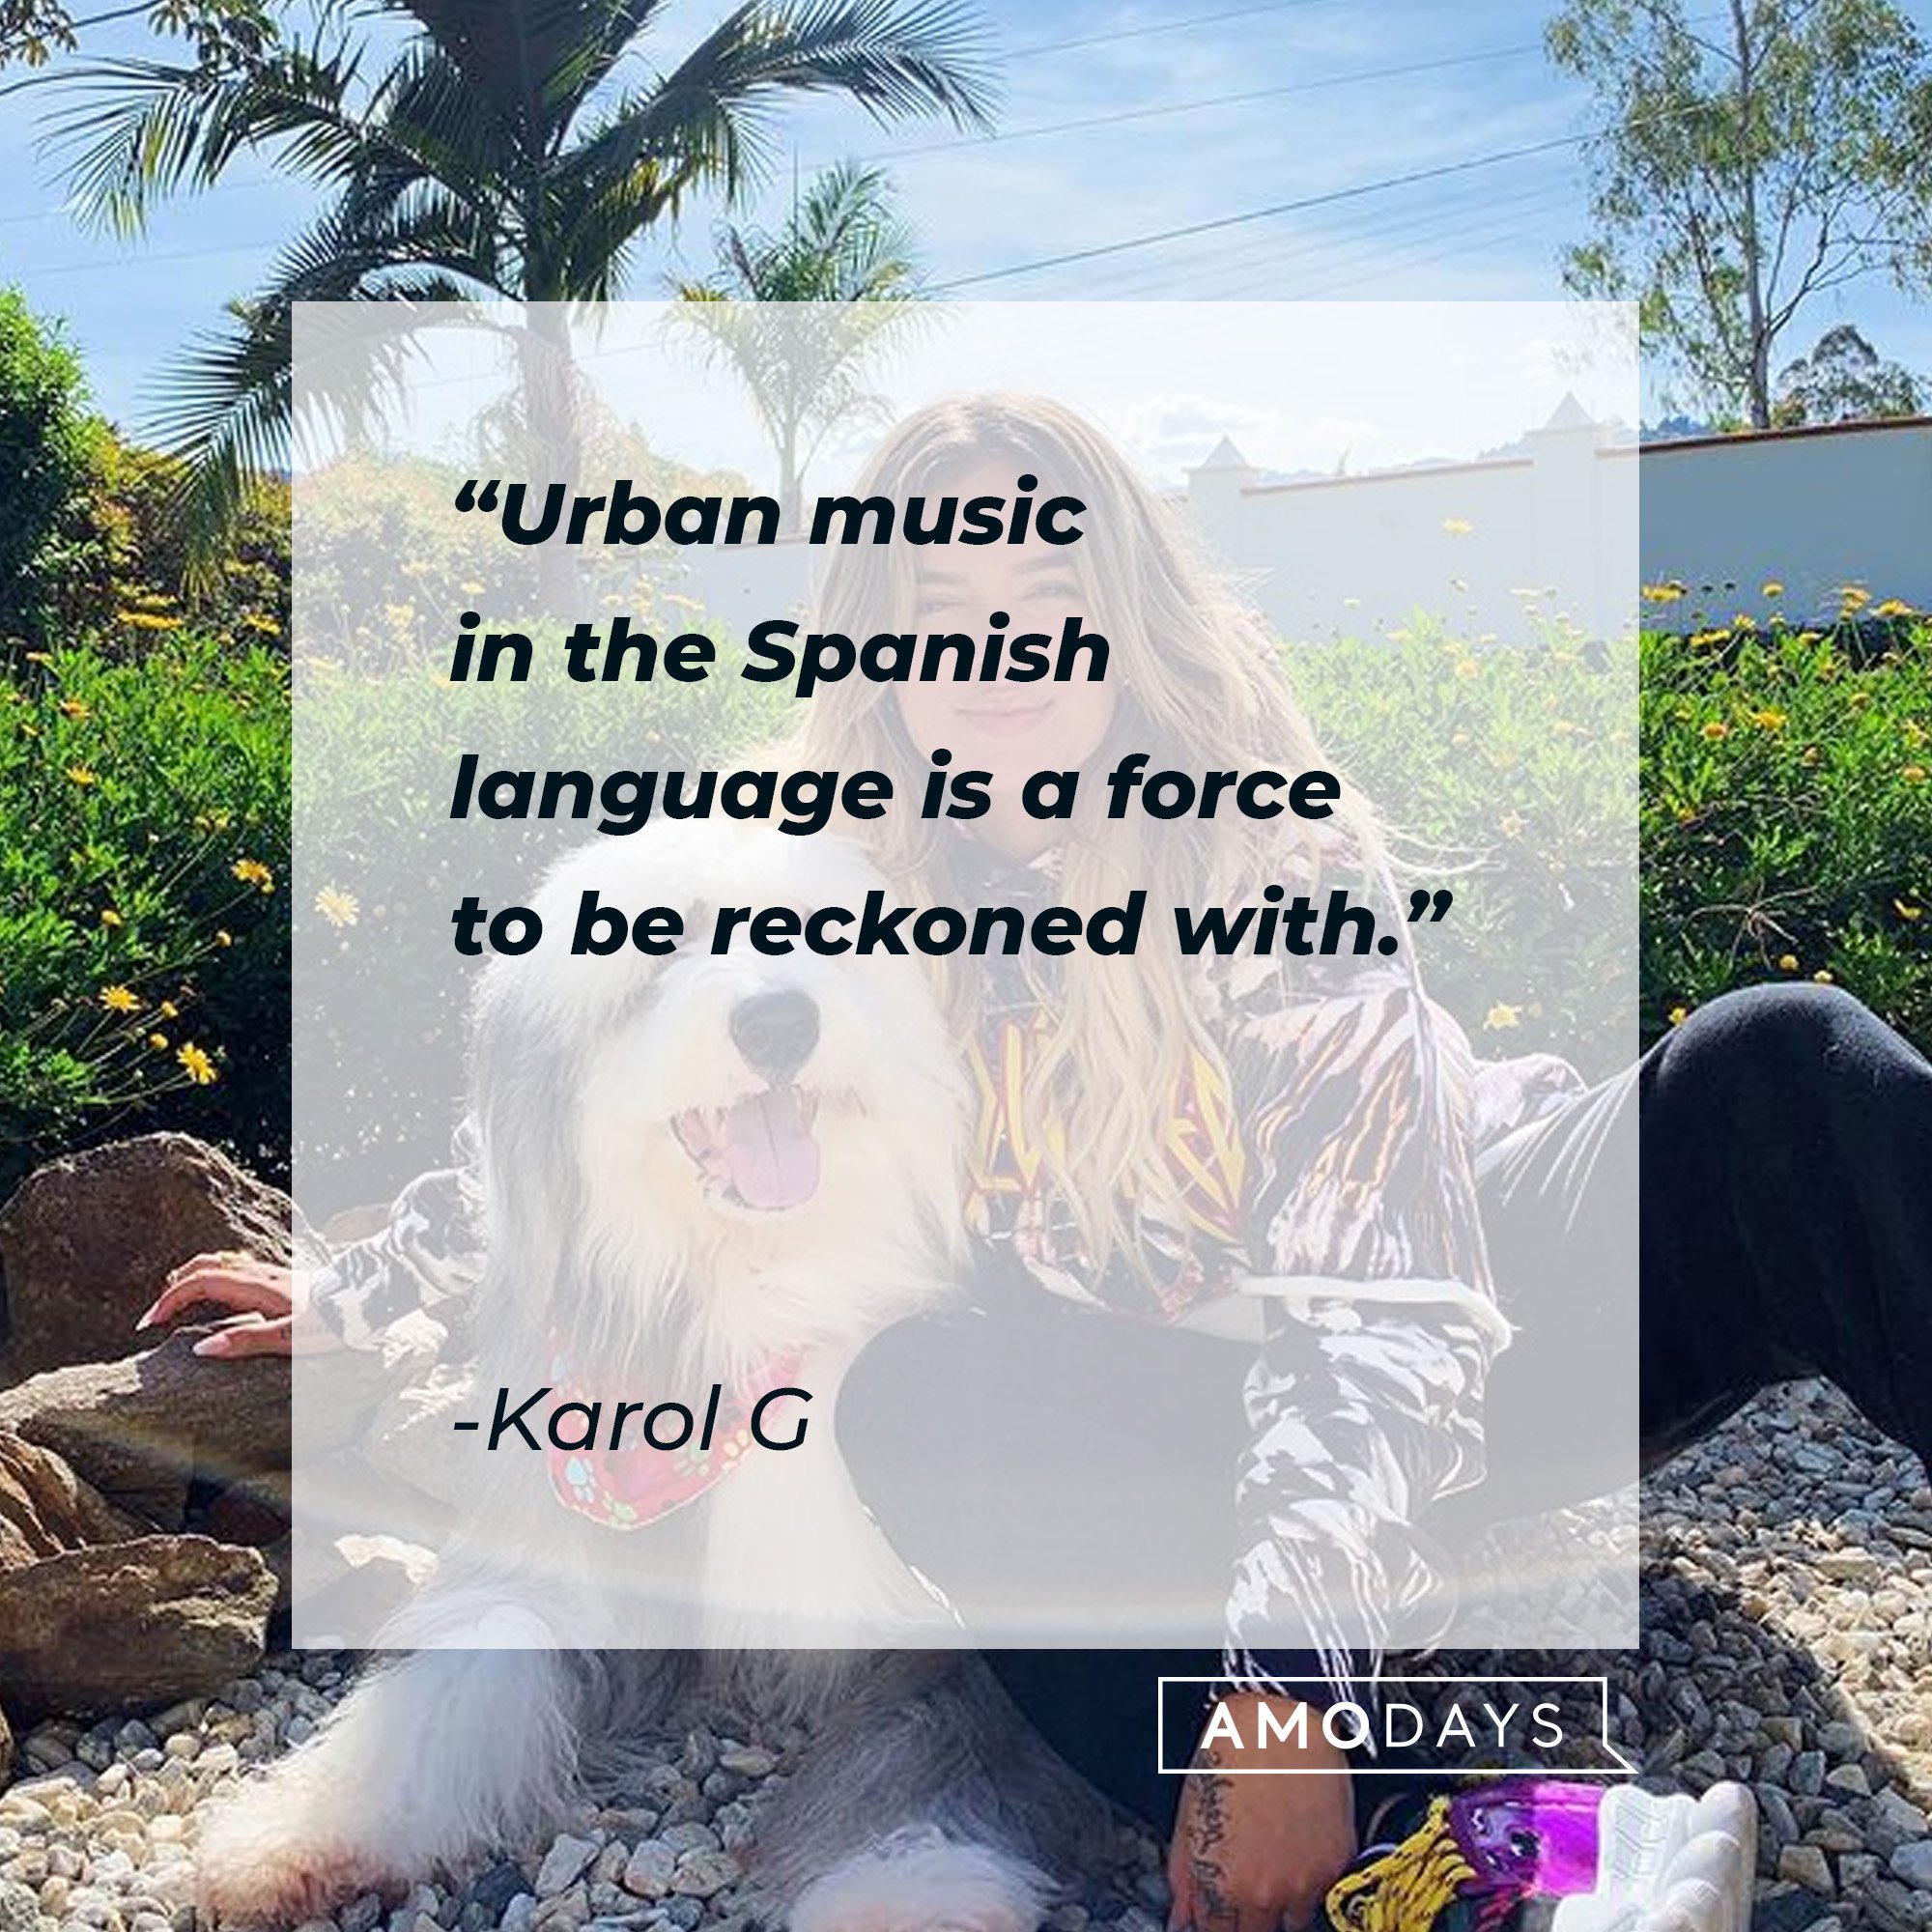 Karol G’s quote: “Urban music in the Spanish language is a force to be reckoned with.” | Image: AmoDays